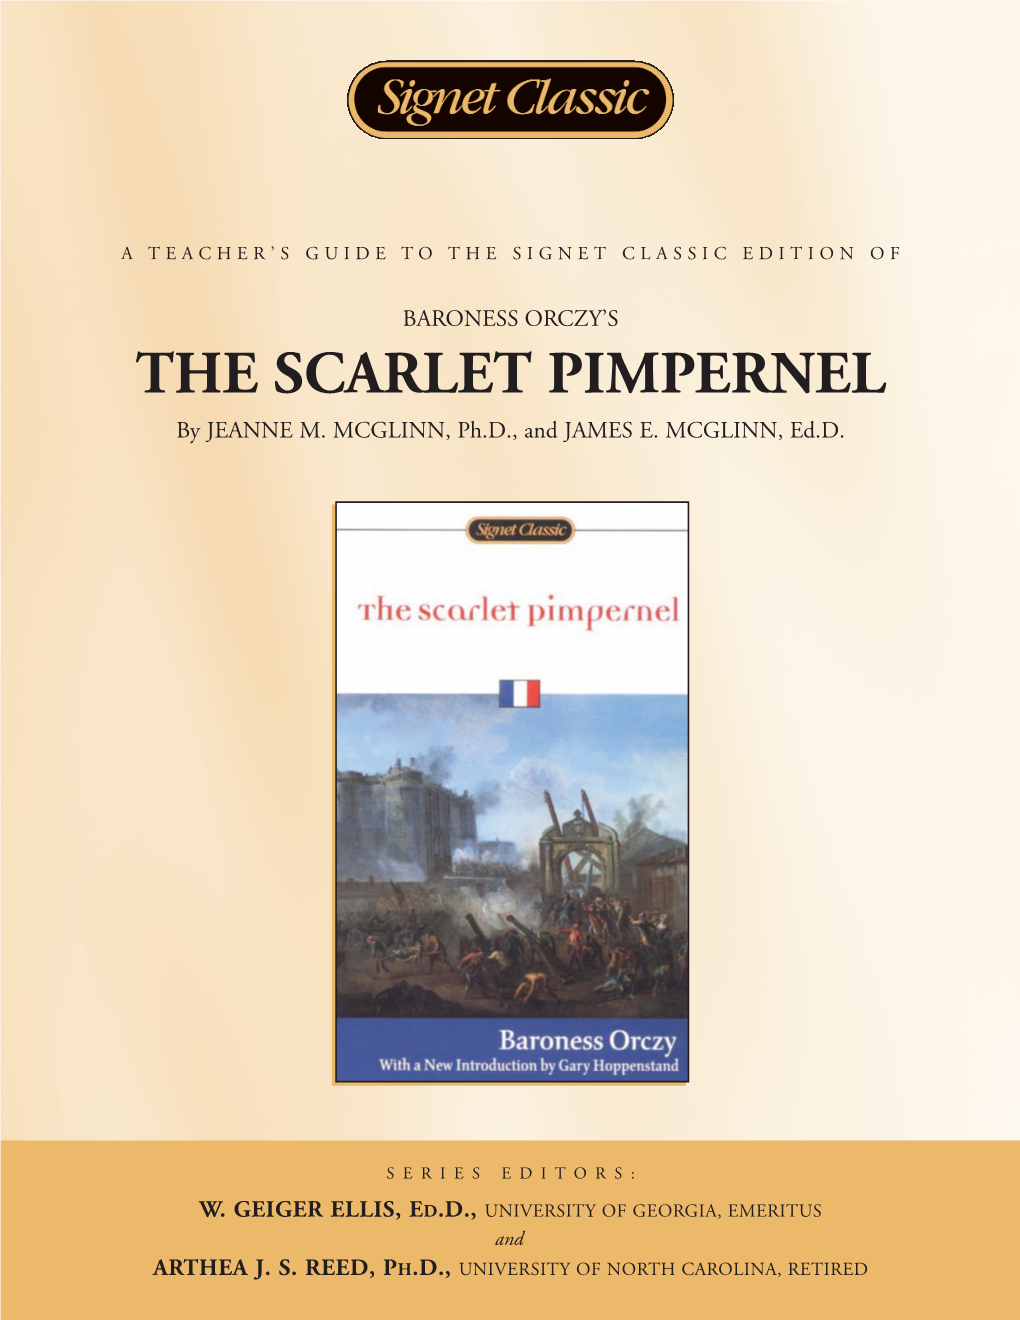 THE SCARLET PIMPERNEL by JEANNE M